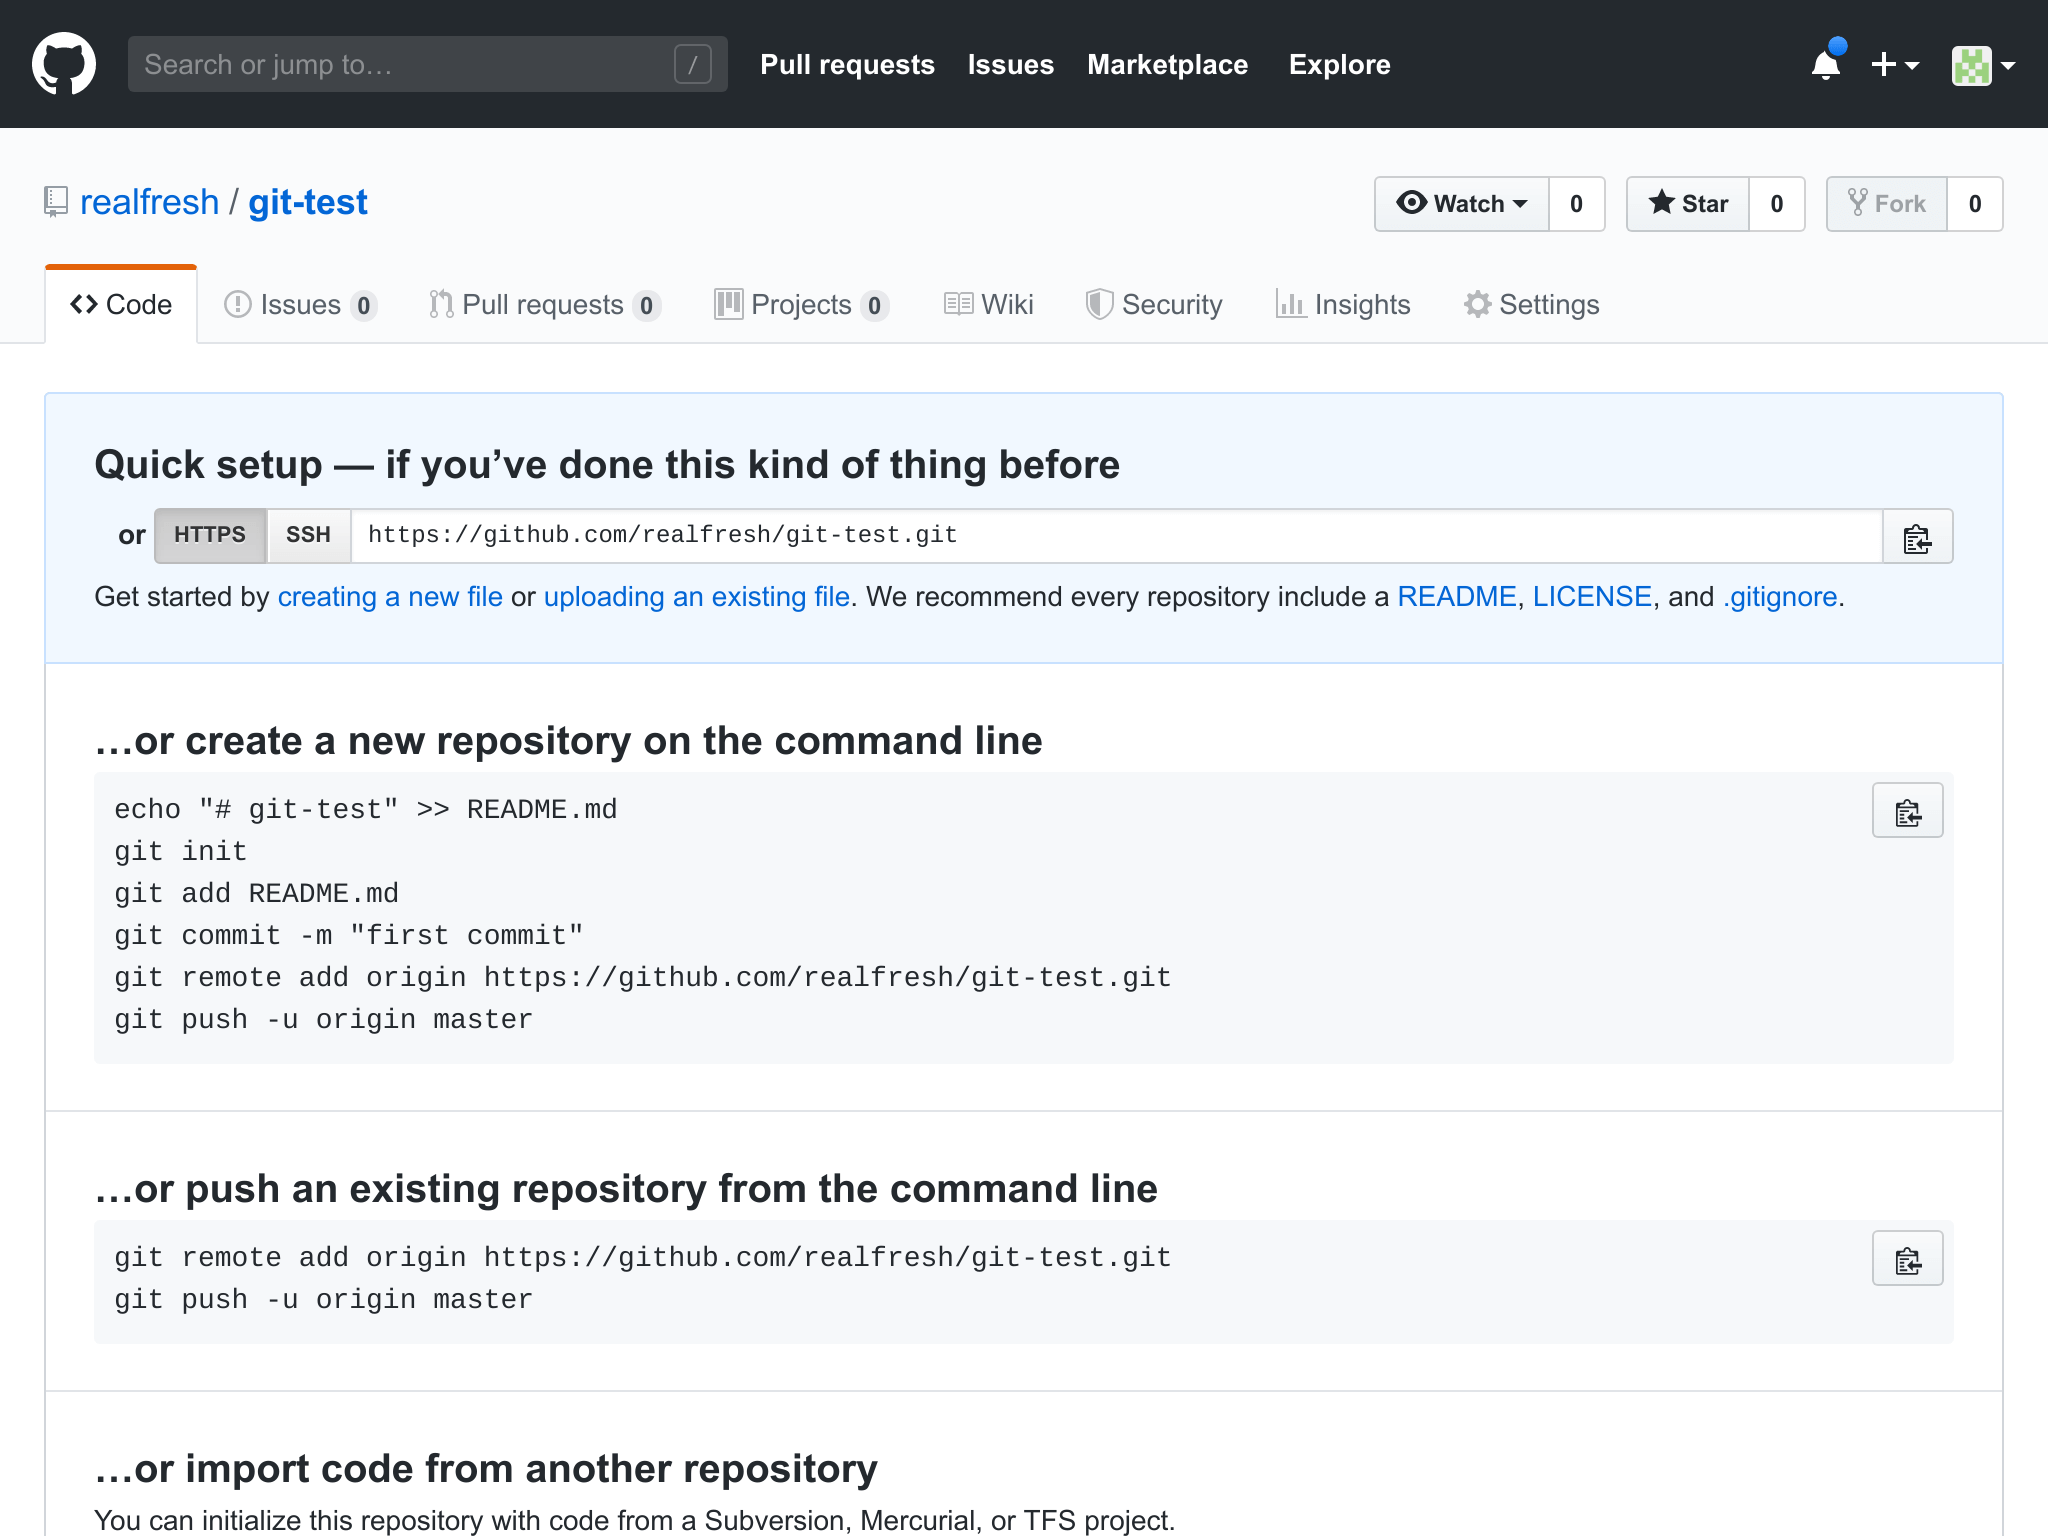 GitHub create a new repo details